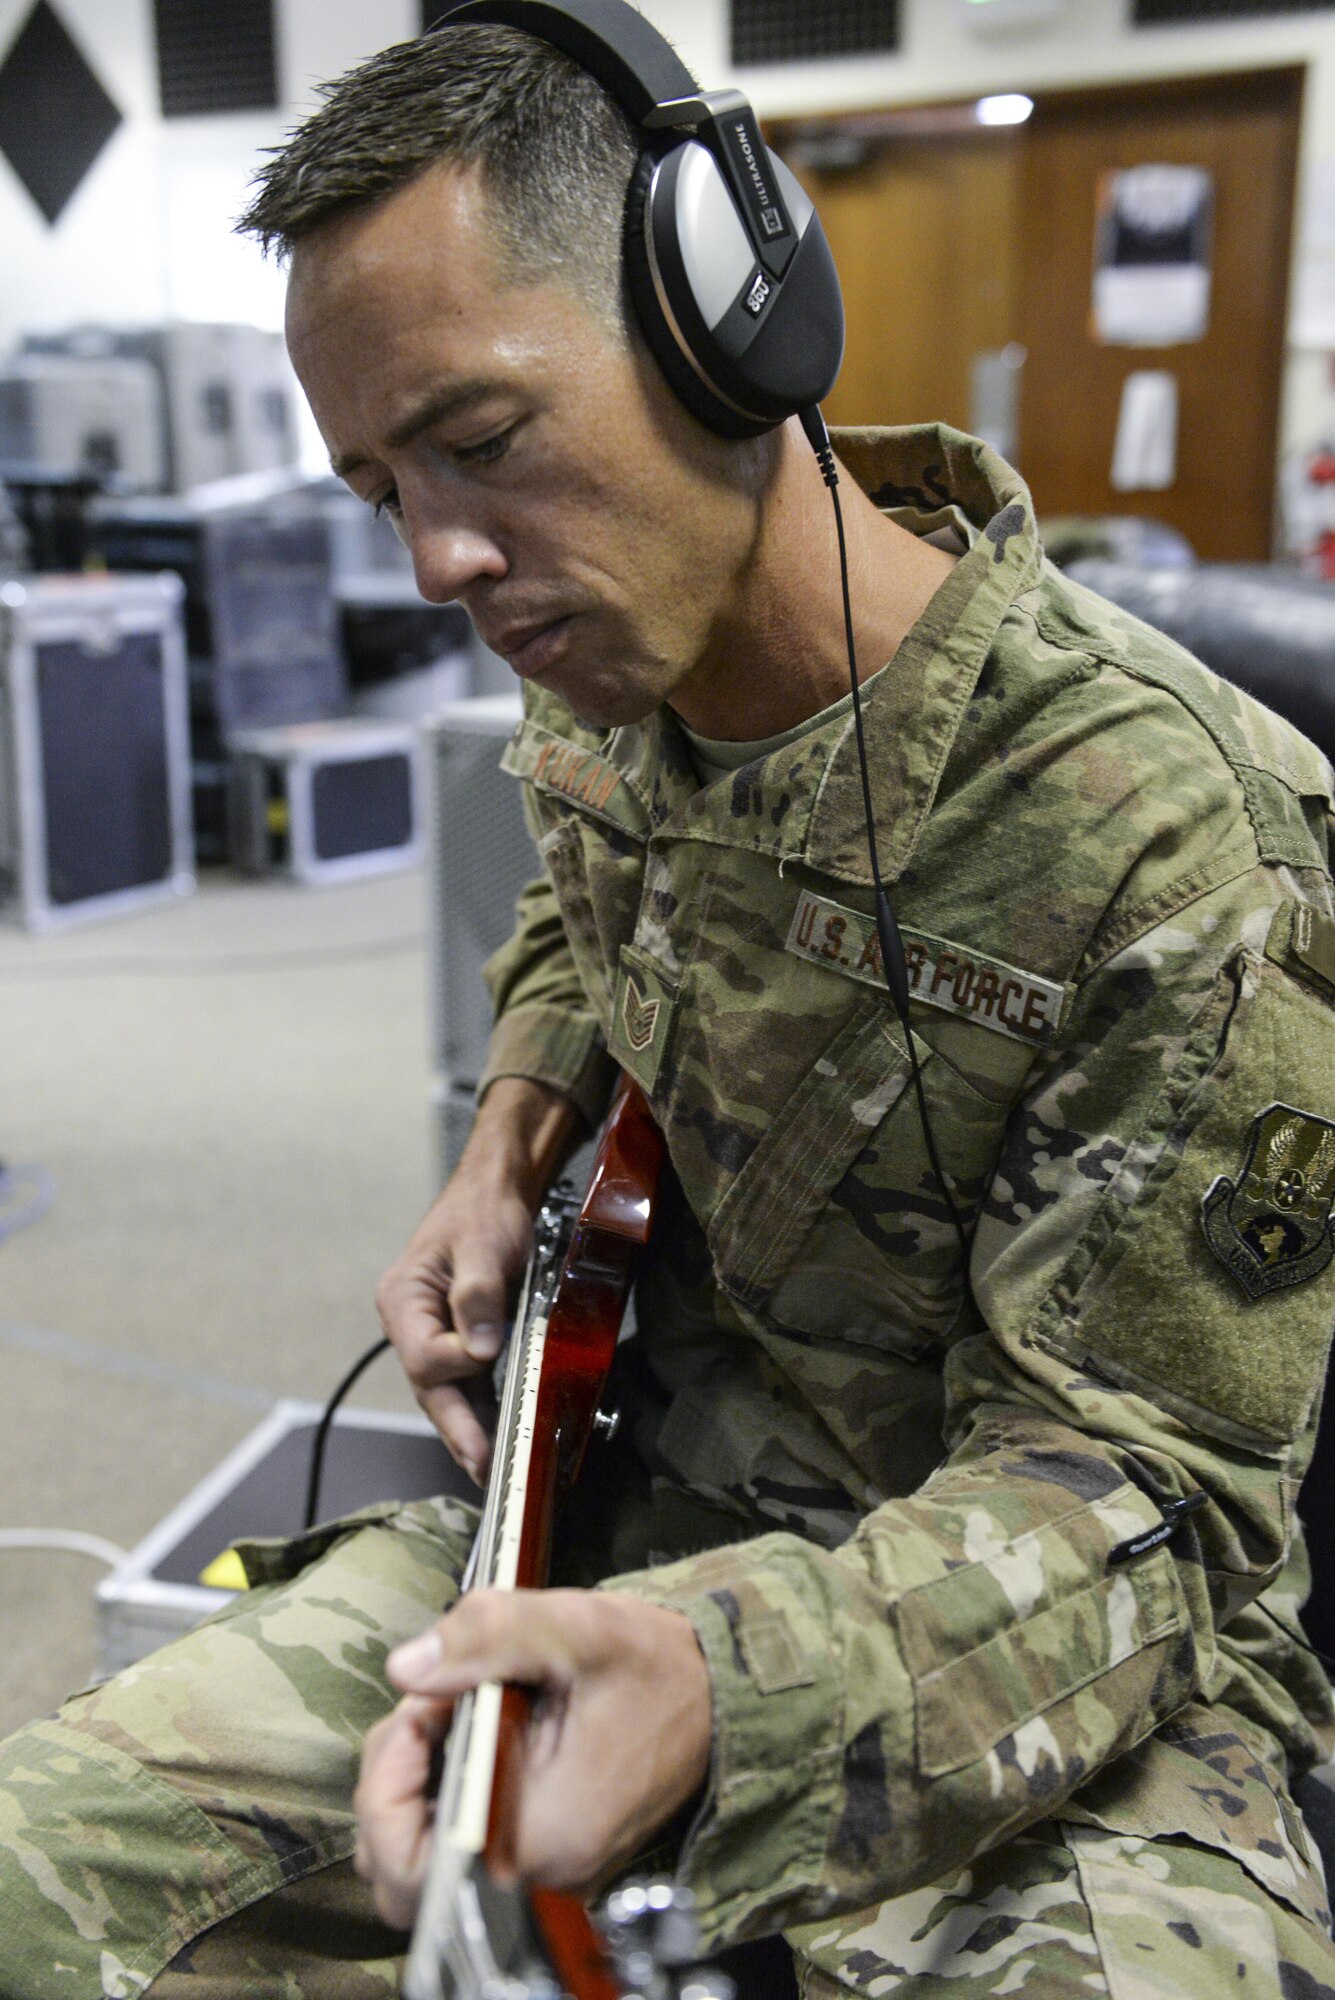 U.S. Air Force Tech. Sgt. John Kukan, non-commissioned officer in charge and guitar player assigned to the Air Force Central Command Band, Touch-n-Go, plays during a recording session as the band recorded their punk rock rendition of the Air Force Song at Al Udeid, Air Force Base, Qatar, Sept. 21, 2017.